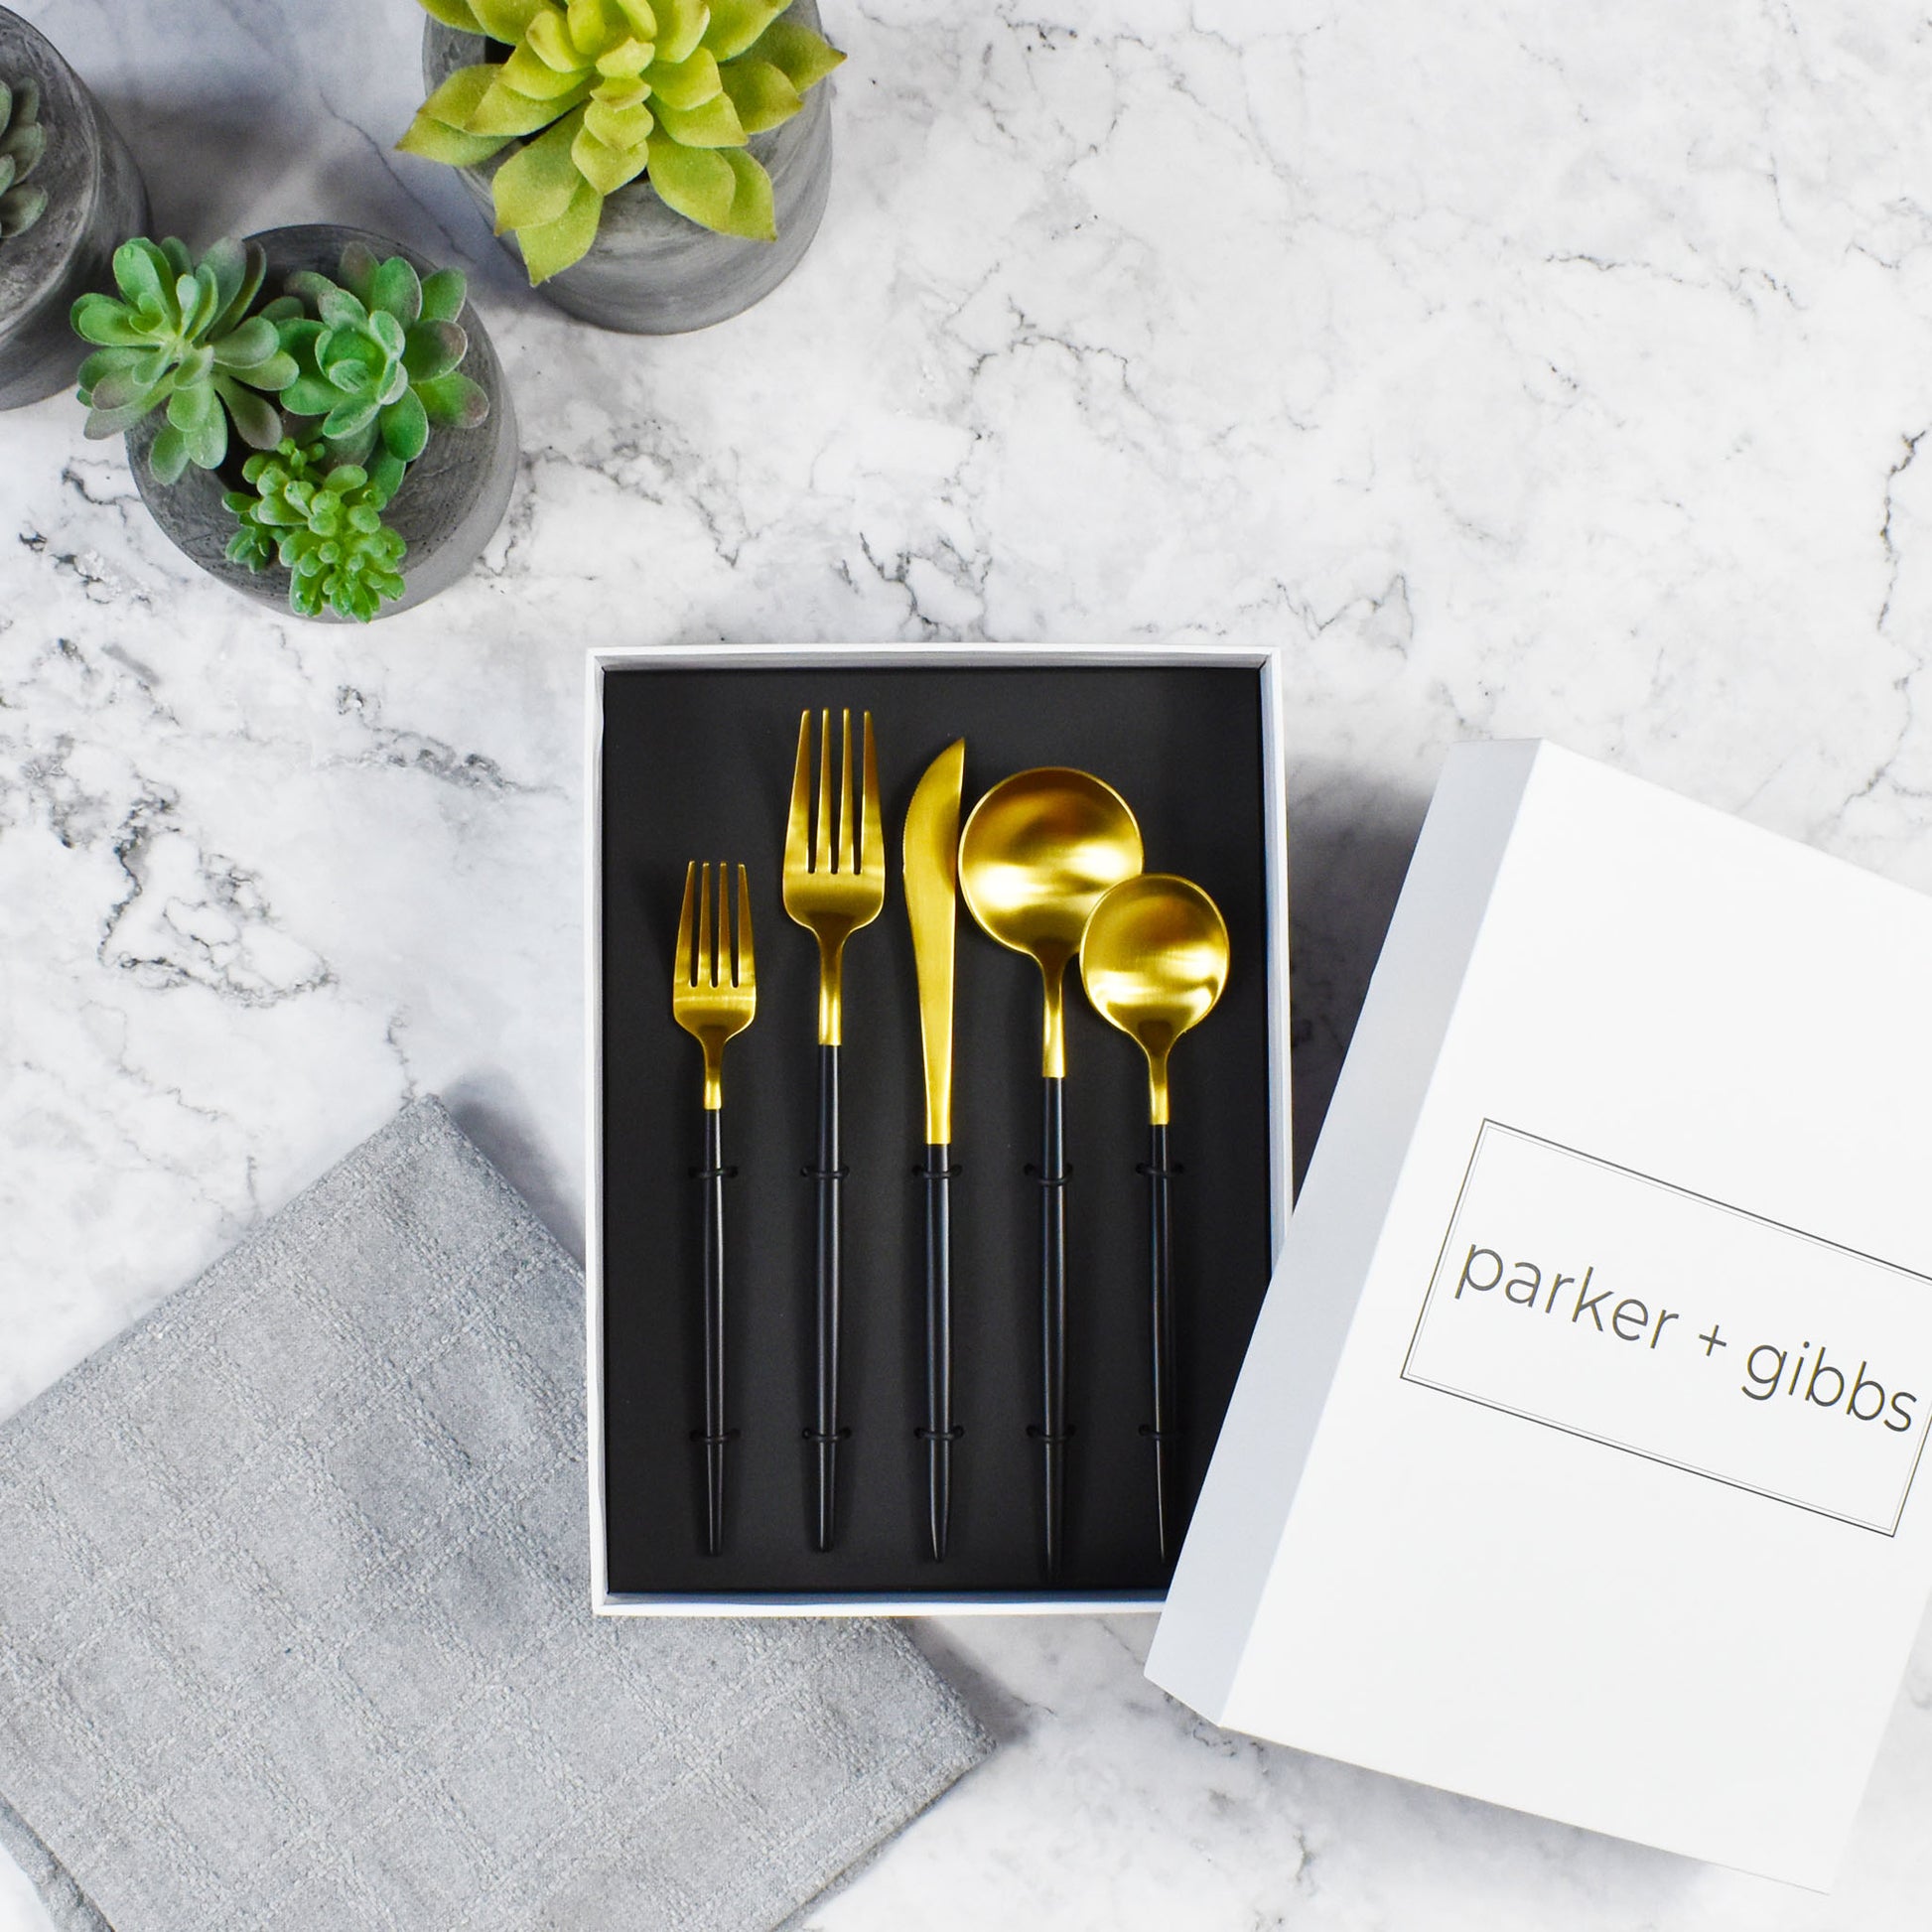 Brushed gold and black handle flatware in custom box on marble countertop with succulents in concrete planters.